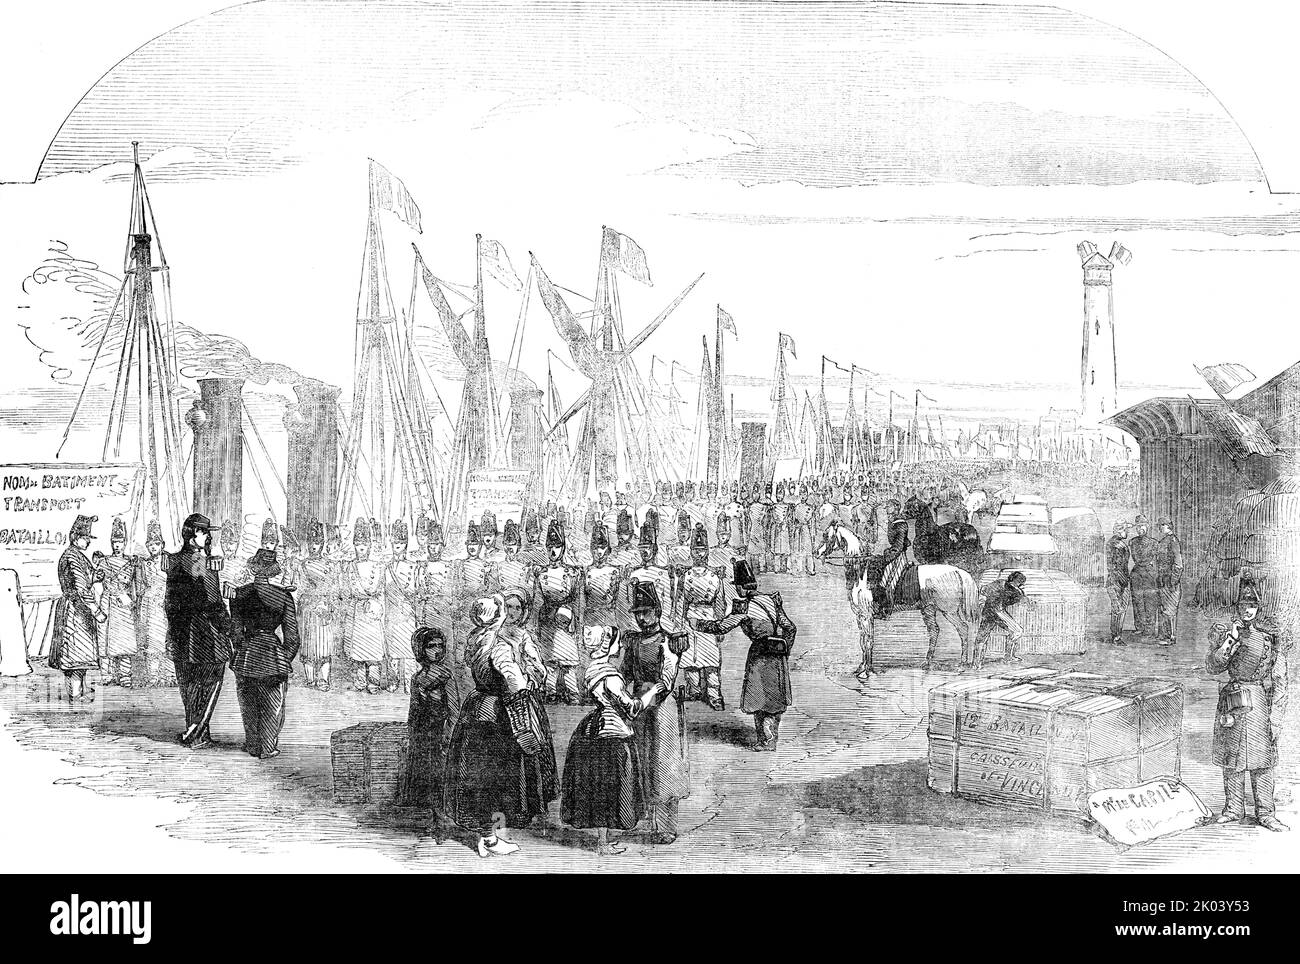 Embarkation of French Troops in English Vessels, at Calais, for the Baltic, 1854. Soldiers leaving France to fight in the Crimean War. 'At a very early hour on Saturday morning the troops were astir, breaking up their encampment and preparing to go on board. General Baraguey d'Hilliers arrived at the quay before eight o'clock, and conversed for some time with Captain Lefebvre, R.N., of her Majesty's steamer Dasher, to whom the arrangements for embarking the troops by means of a fleet of steamers, had been entrusted...This large fleet of steam-ships had been engaged with the object of precludin Stock Photo